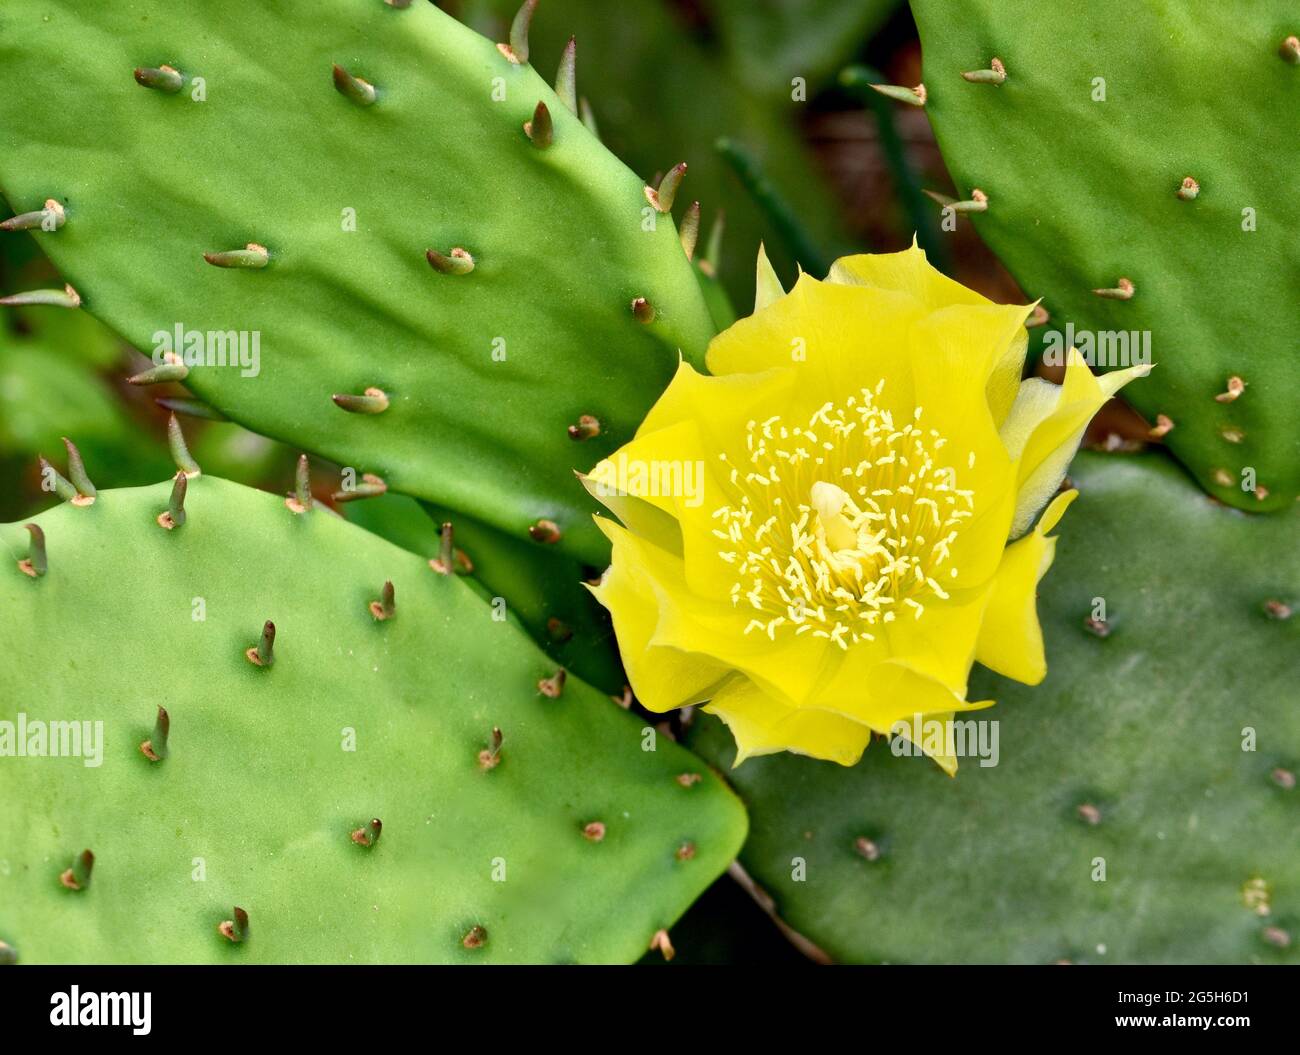 Closeup of the yellow flower and spiny pads of the Eastern Prickly Pear Cactus (Opuntia humifusa). Stock Photo